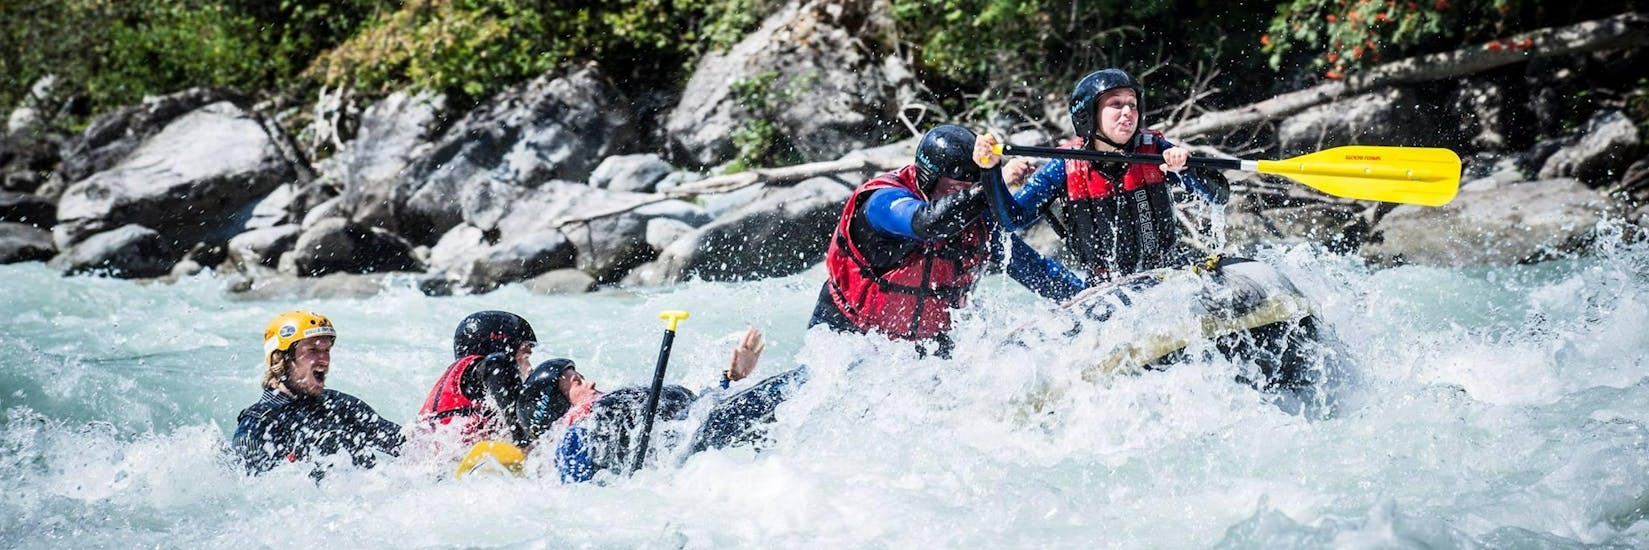 A group on a raft boat fighting the whitewater wihle X-treme Rafting on the Ötztaler Ache with H2O Adventure Ried.